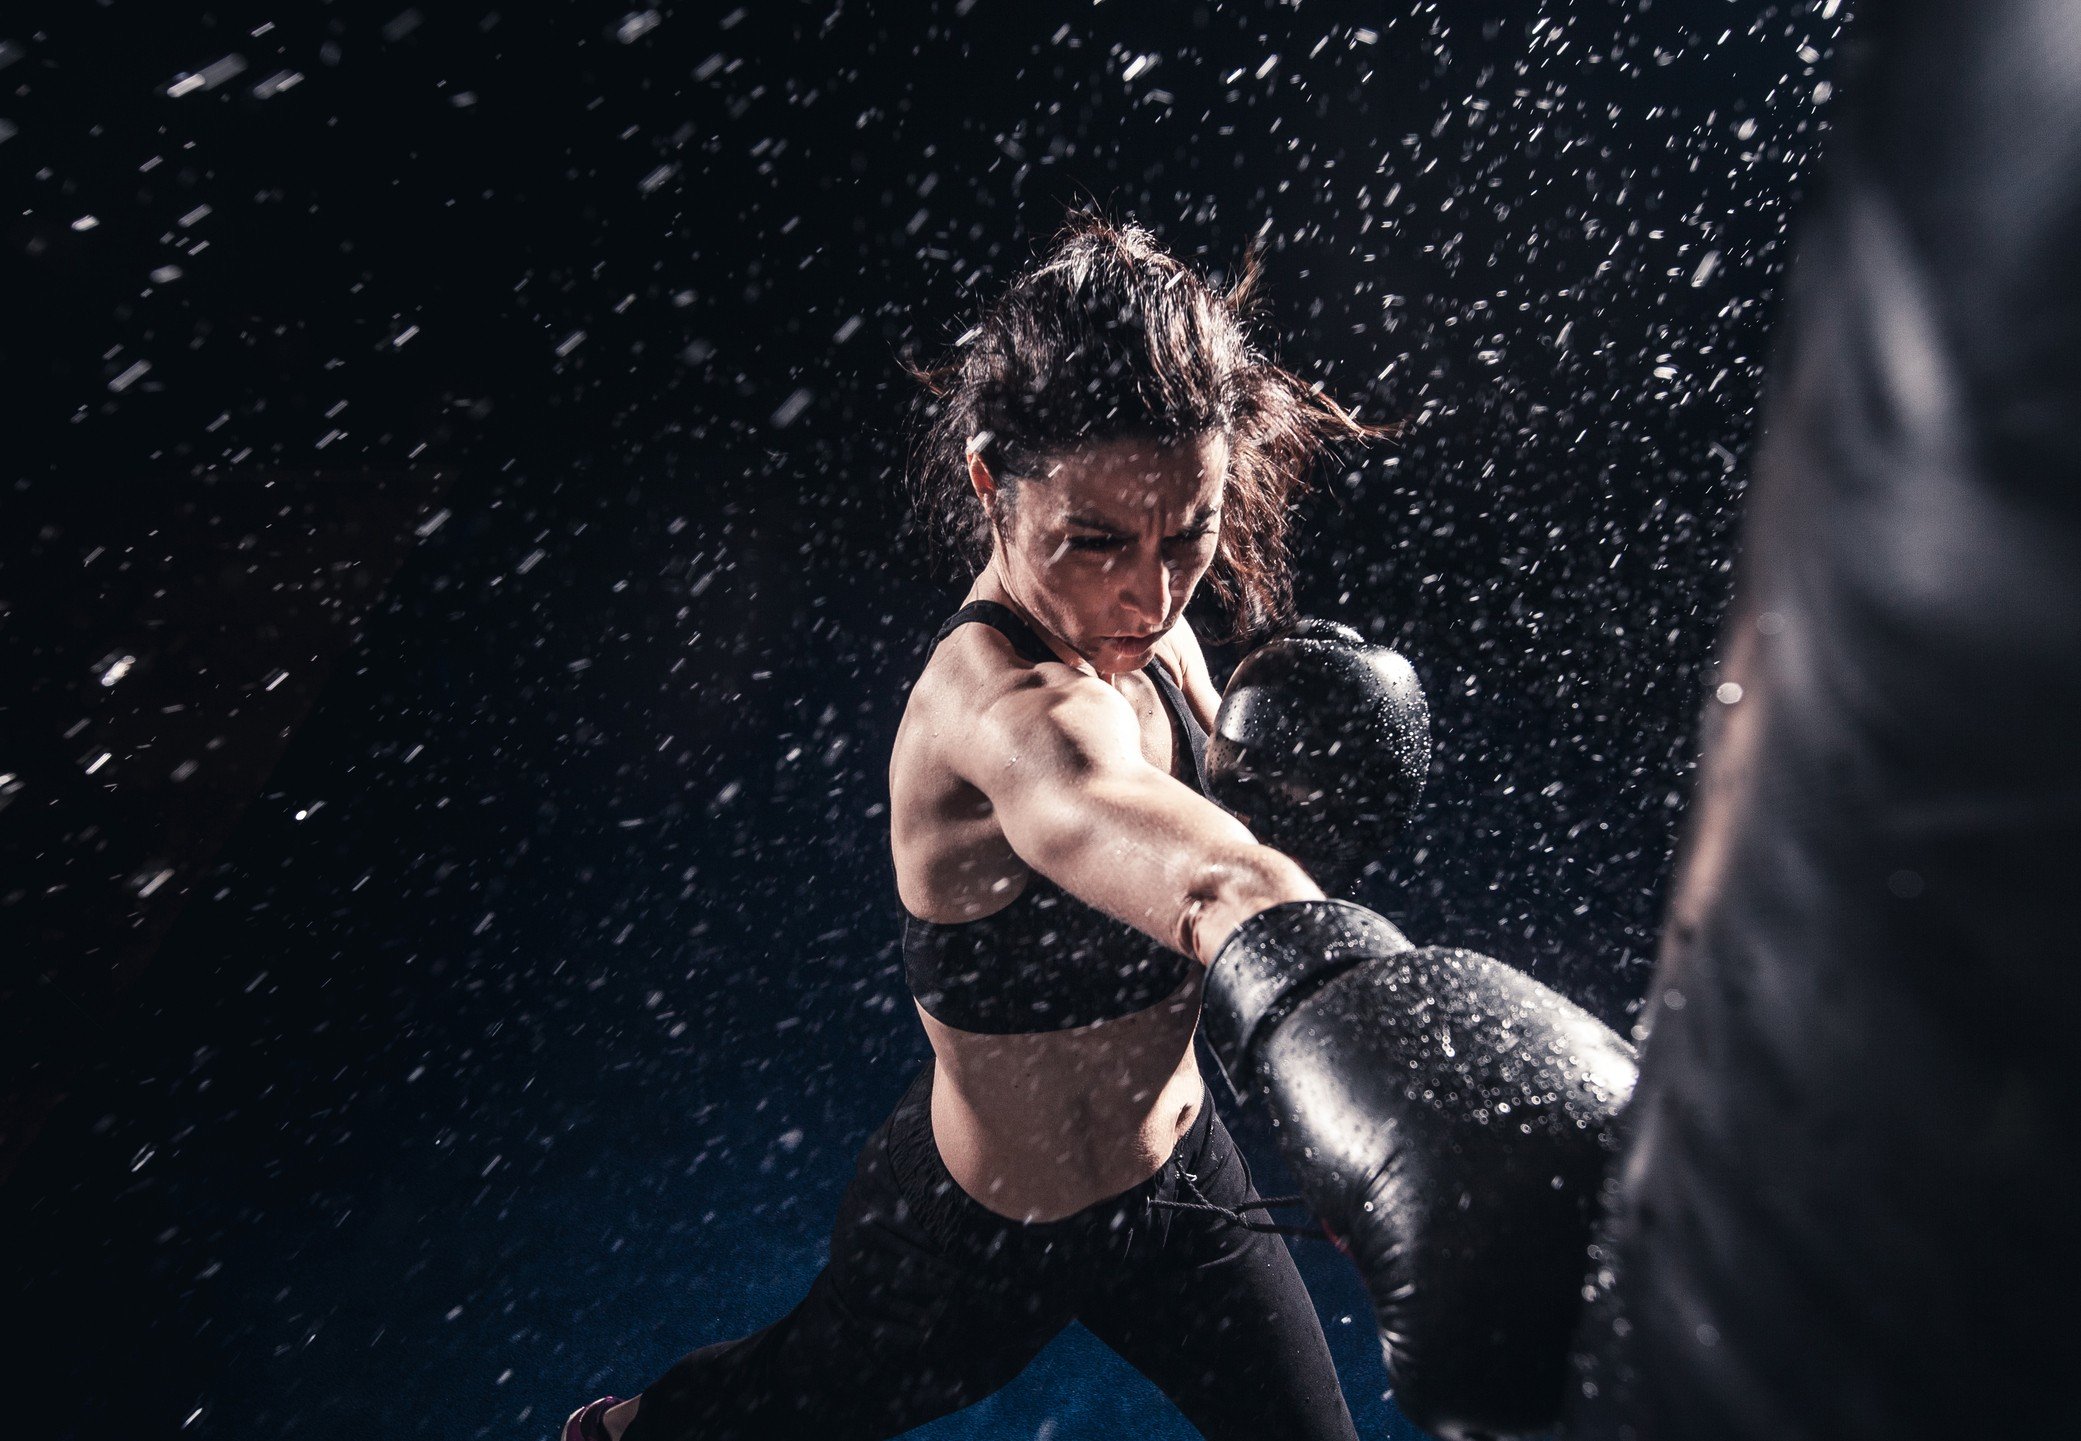 Fitness fans looking for something a little different can try Lights Out Boxing Club, in Causeway Bay, Hong Kong, which offers boxing and high-intensity interval training workouts in a dark nightclub-style setting, accompanied by loud, immersive music.